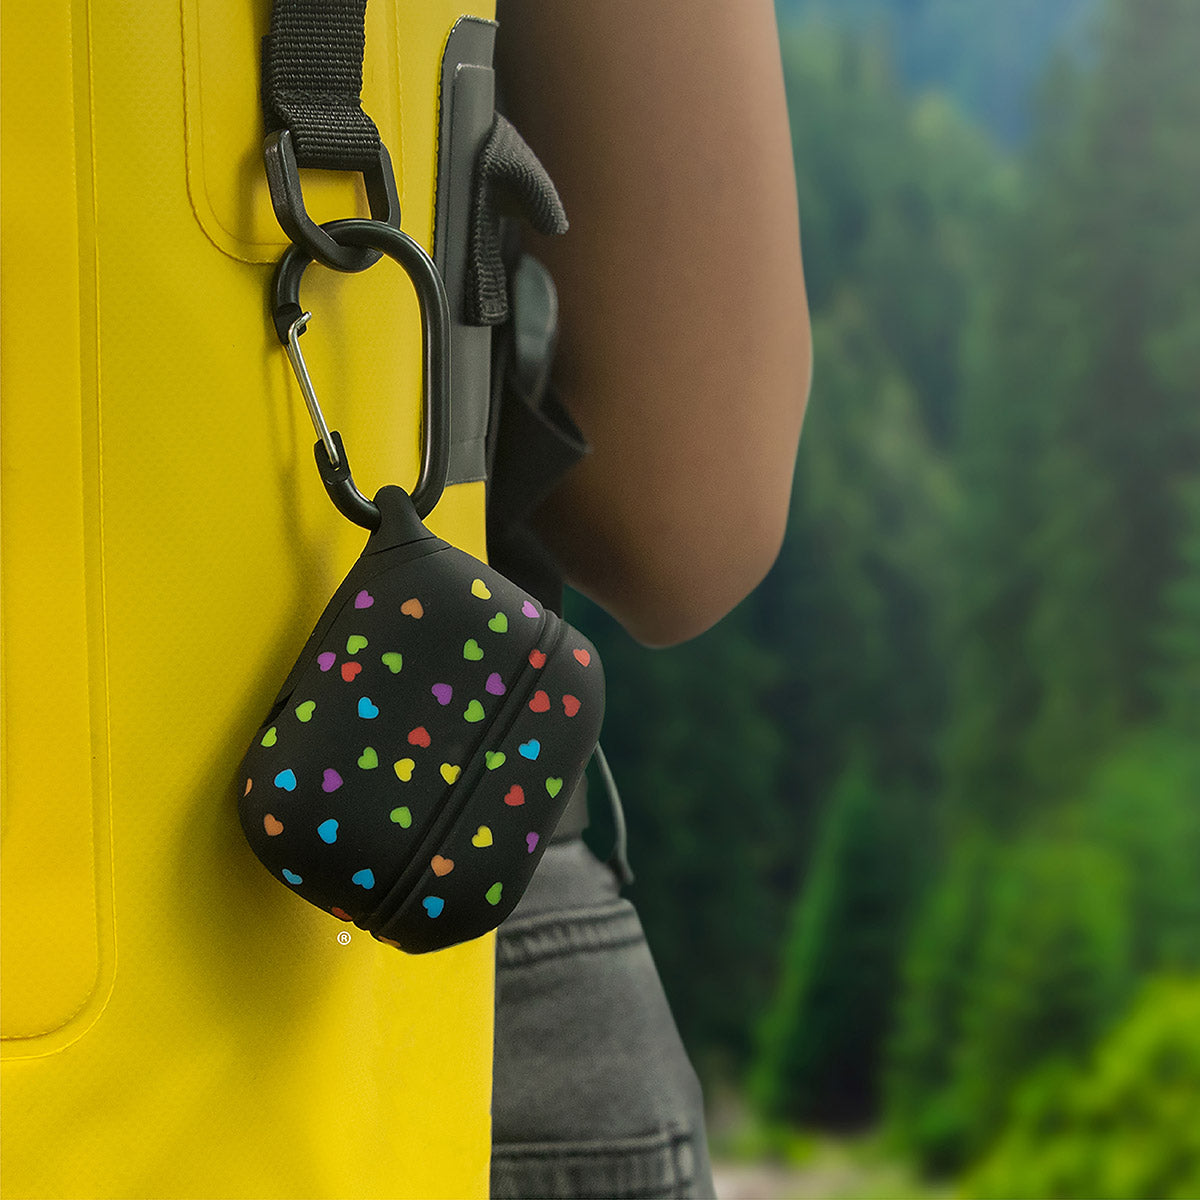 CATAPLAPDPROHTB | catalyst airpods pro gen 2 1 waterproof case carabiner special edition black with hearts attached to a yellow bag